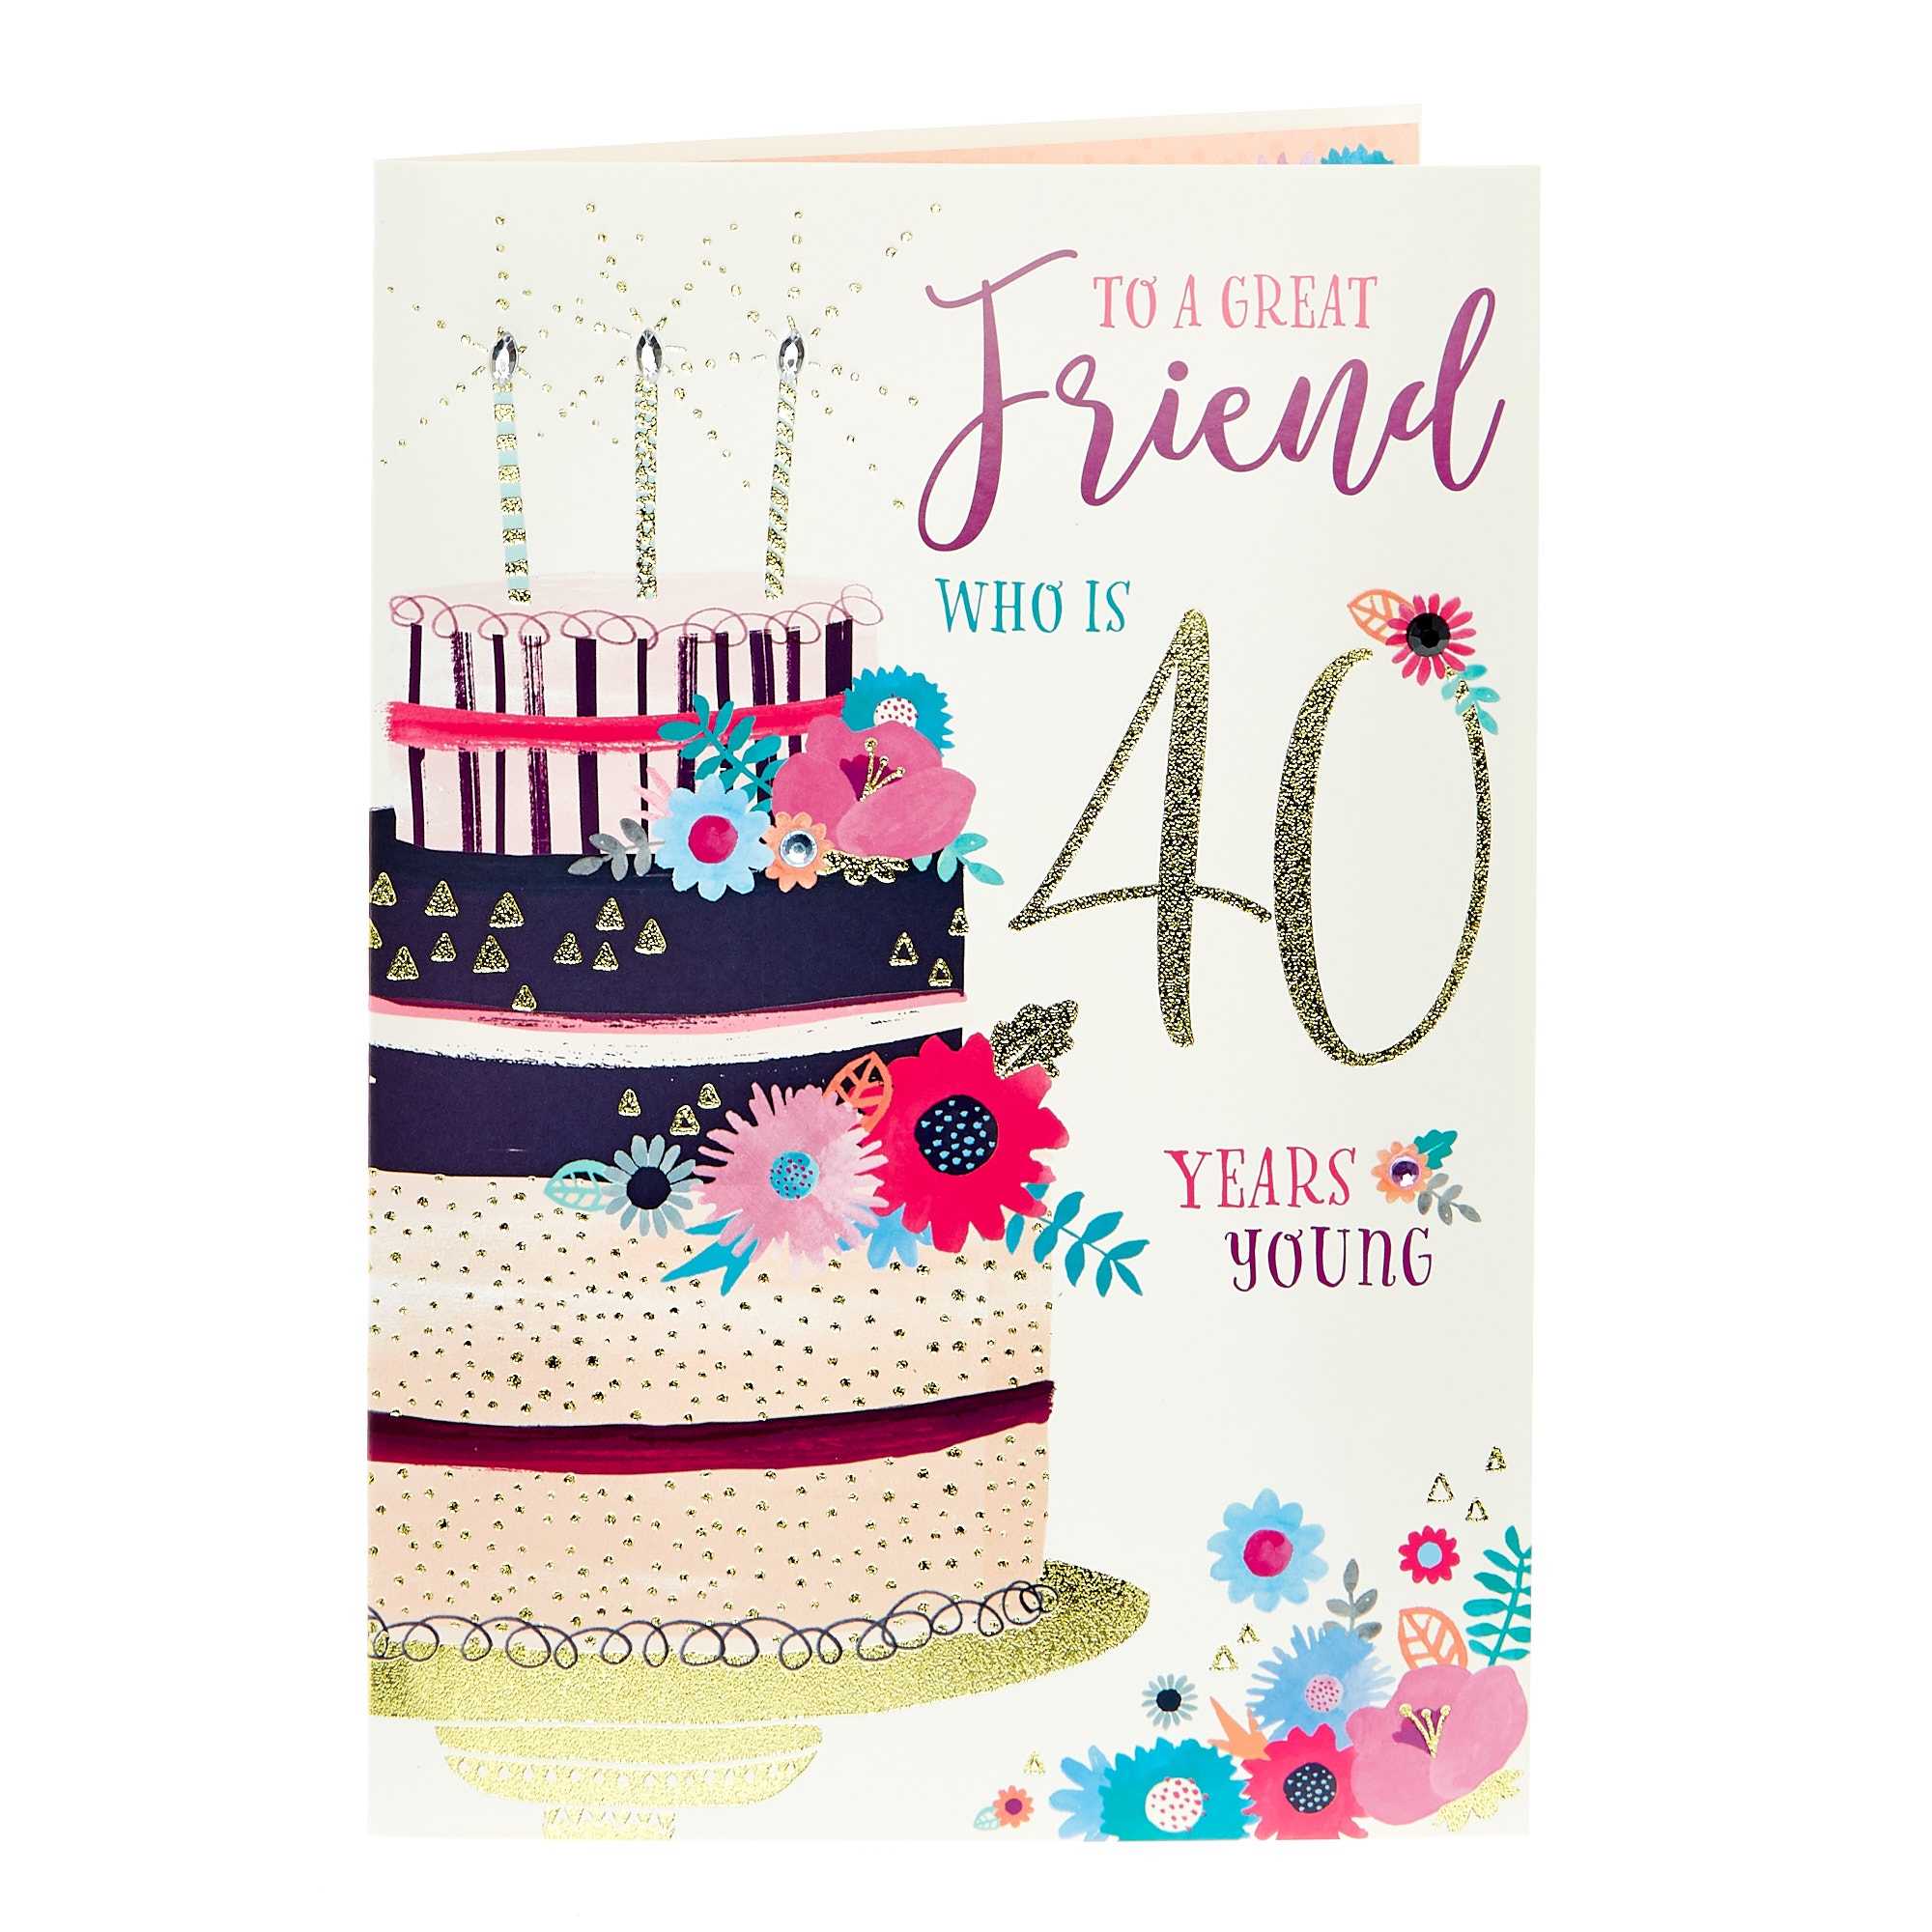 Buy 40th Birthday Card - To A Great Friend for GBP 1.29 | Card Factory UK